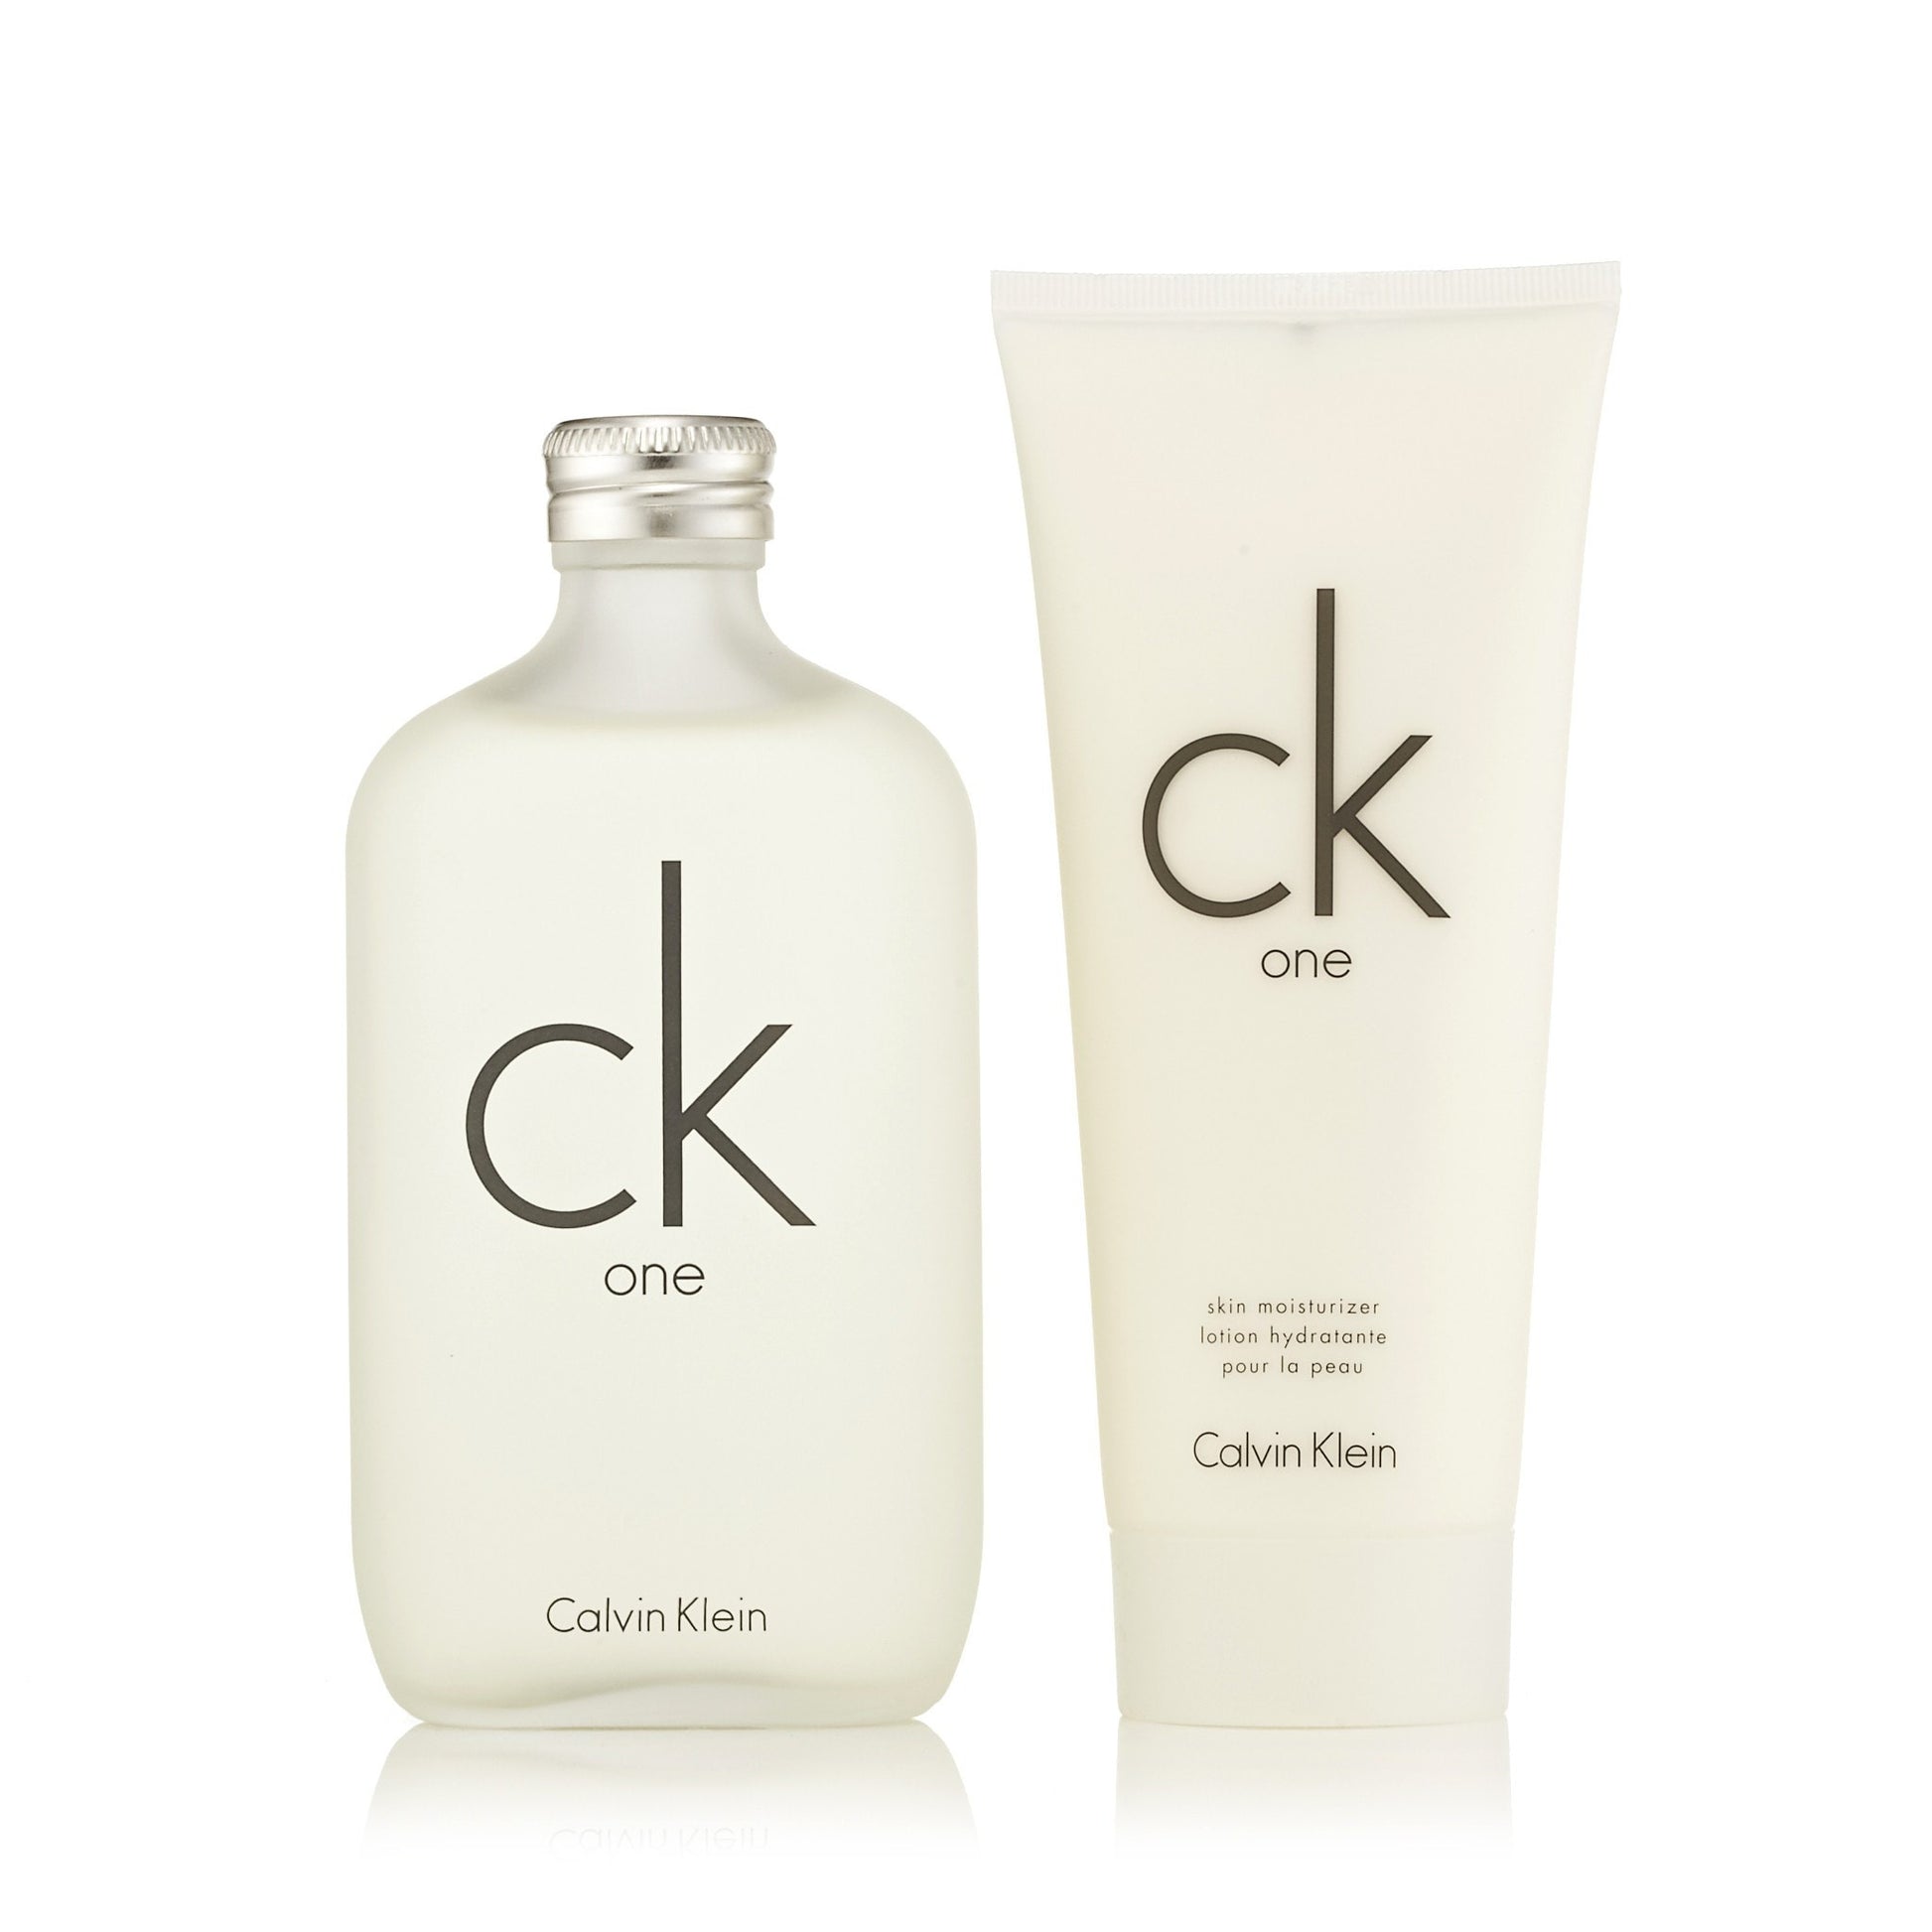 CK One Gift Set EDT and Skin Moisturizer for Women and Men by Calvin Klein Click to open in modal